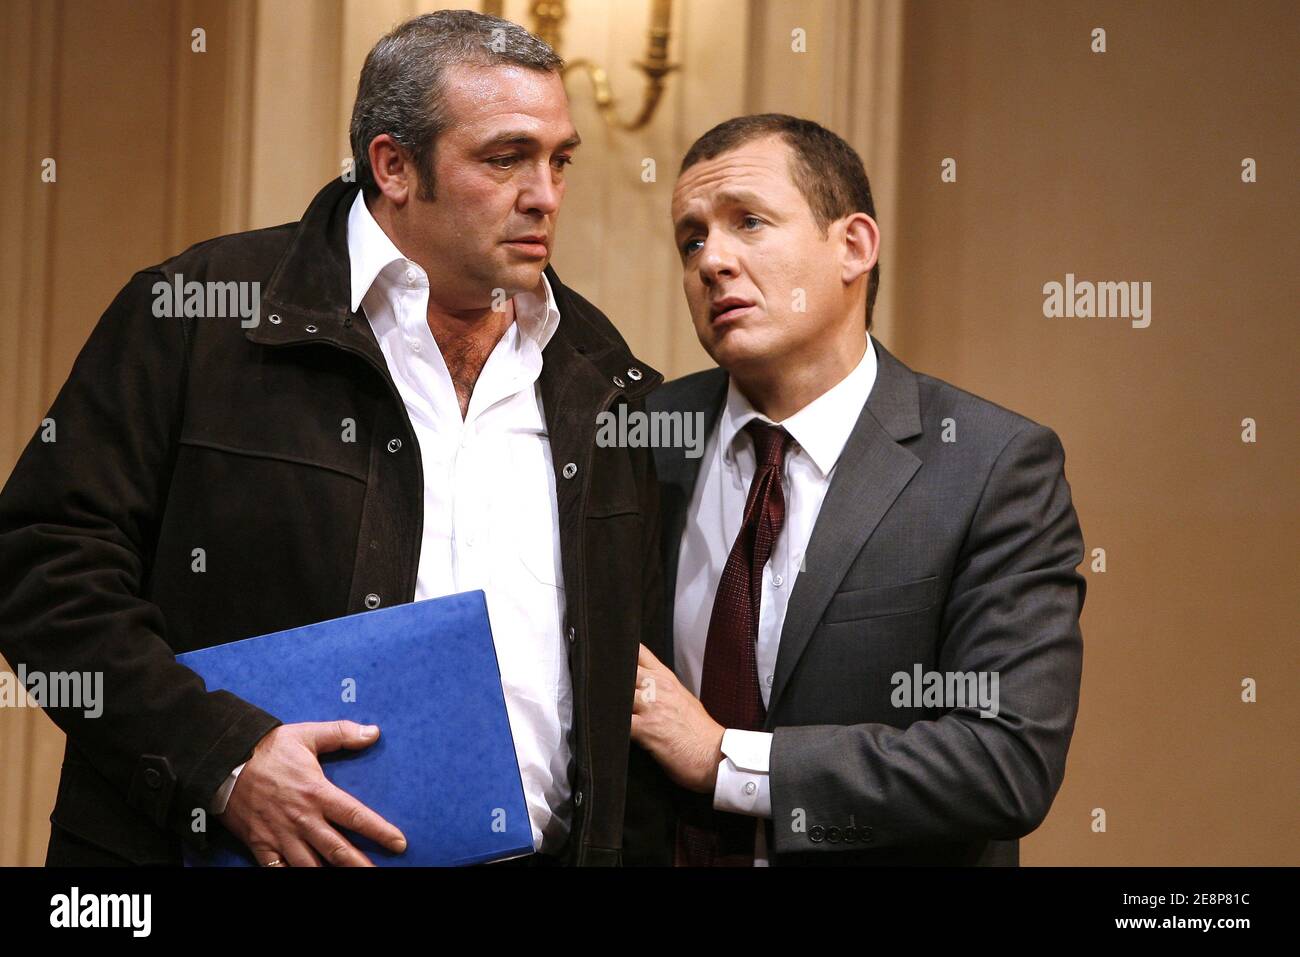 French actors Laurent Gamelon and Dany Boon during the run-through of the play 'Le Diner de Cons', staged by Francis Veber at the Theatre de la Porte Saint-Martin in Paris, France on September 19, 2007. Also starring in the play: Arthur, Stephane Bierry, Jessica Borio, Olivier Granier and Juliette Meyniac. Photo by Thierry Orban/ABACAPRESS.COM Stock Photo